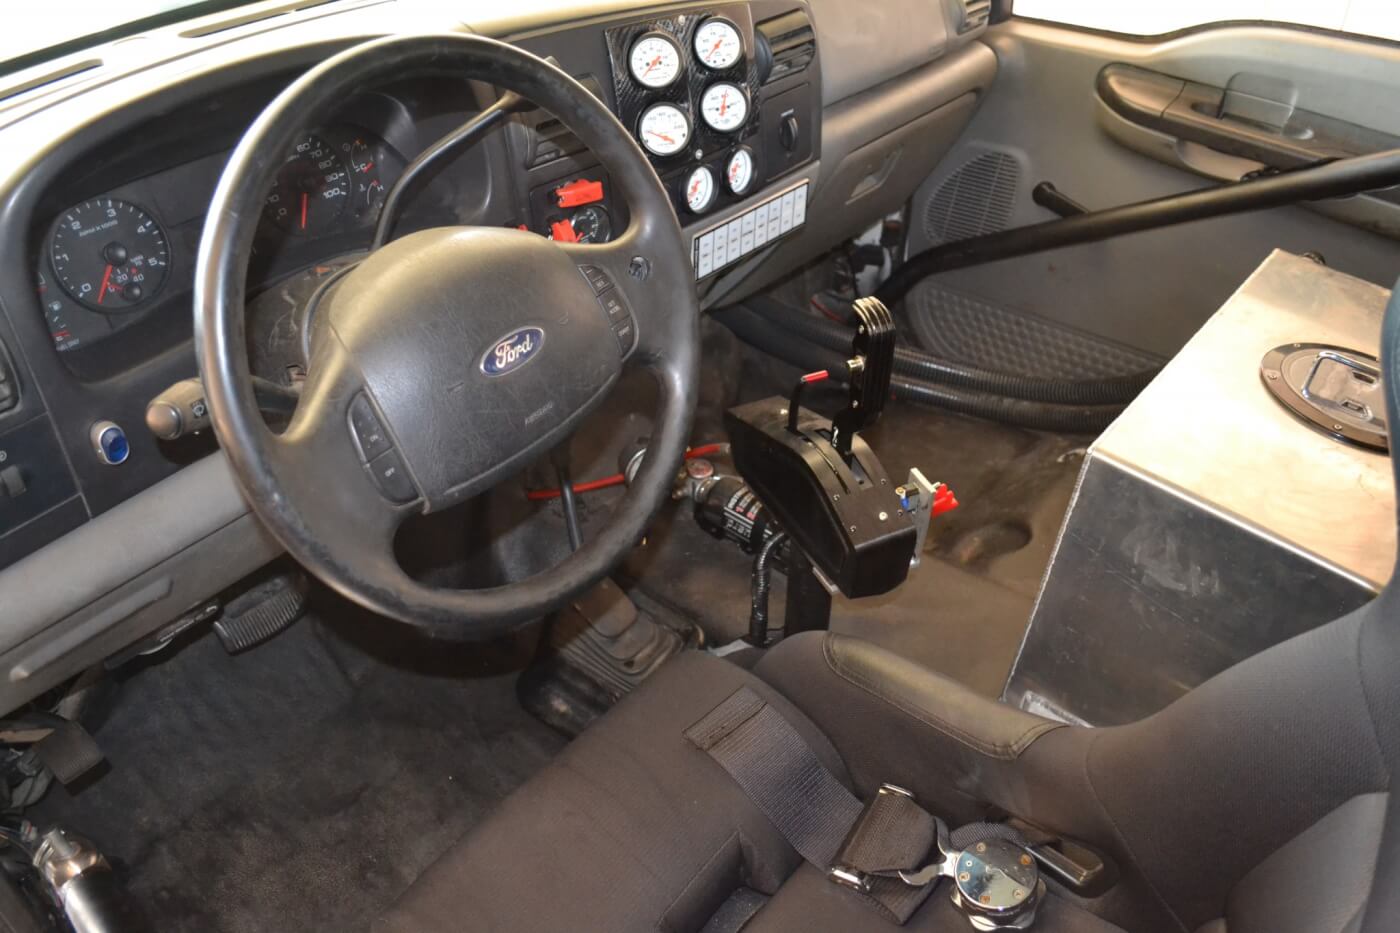 Much of the factory interior on Matt's truck has been removed and replaced with a racing seat, pushbutton switches, and the big intercooler tank. If Matt decides to drop even more weight, the power windows and factory dash are the next to go.